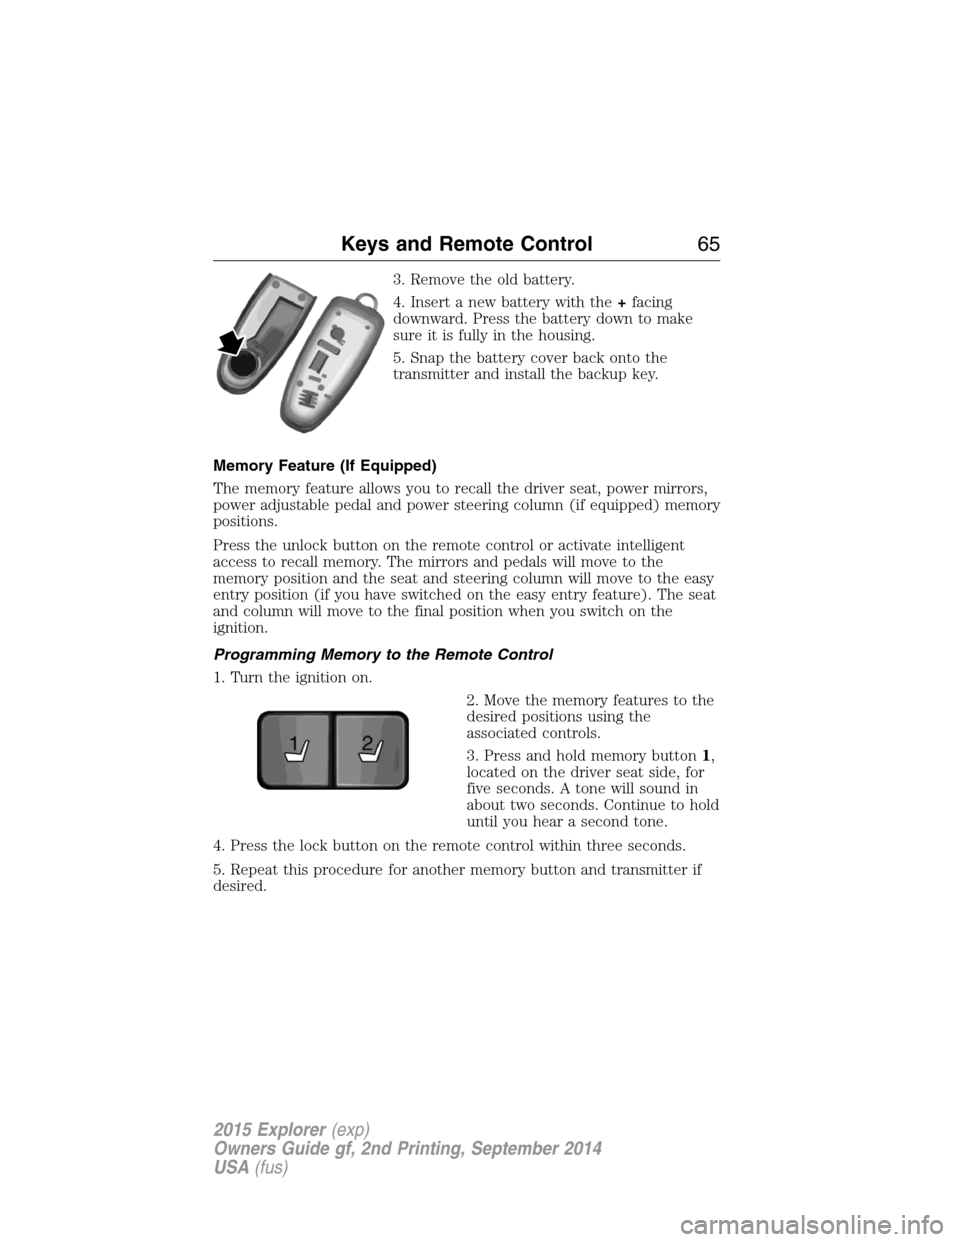 FORD EXPLORER 2015 5.G Owners Manual 3. Remove the old battery.
4. Insert a new battery with the+facing
downward. Press the battery down to make
sure it is fully in the housing.
5. Snap the battery cover back onto the
transmitter and ins